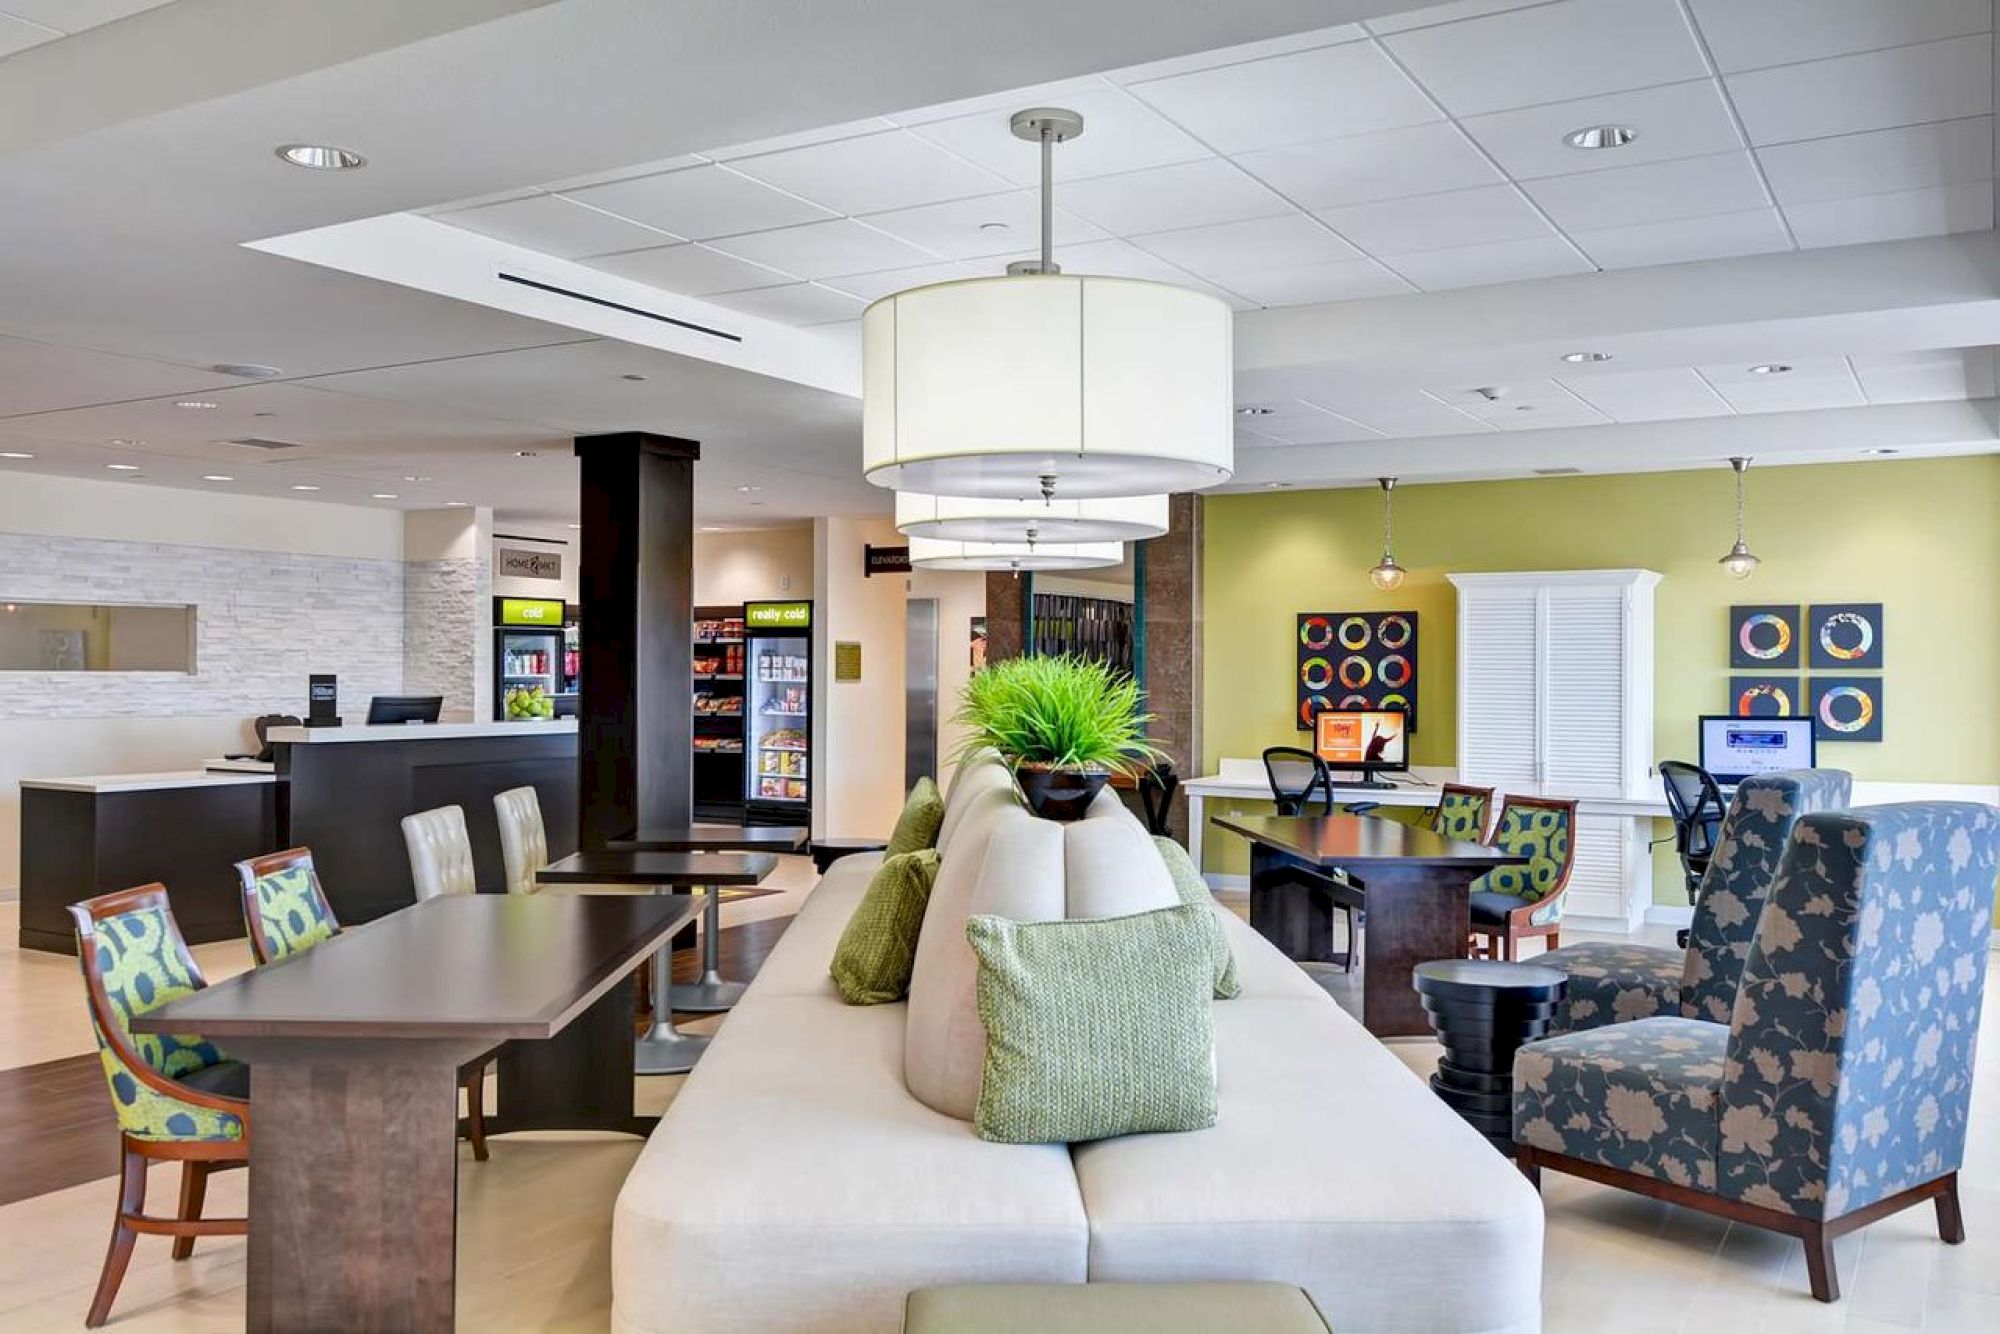 This image depicts a modern lounge area with comfortable seating, tables, plants, and colorful decor, suggesting a welcoming and stylish environment.